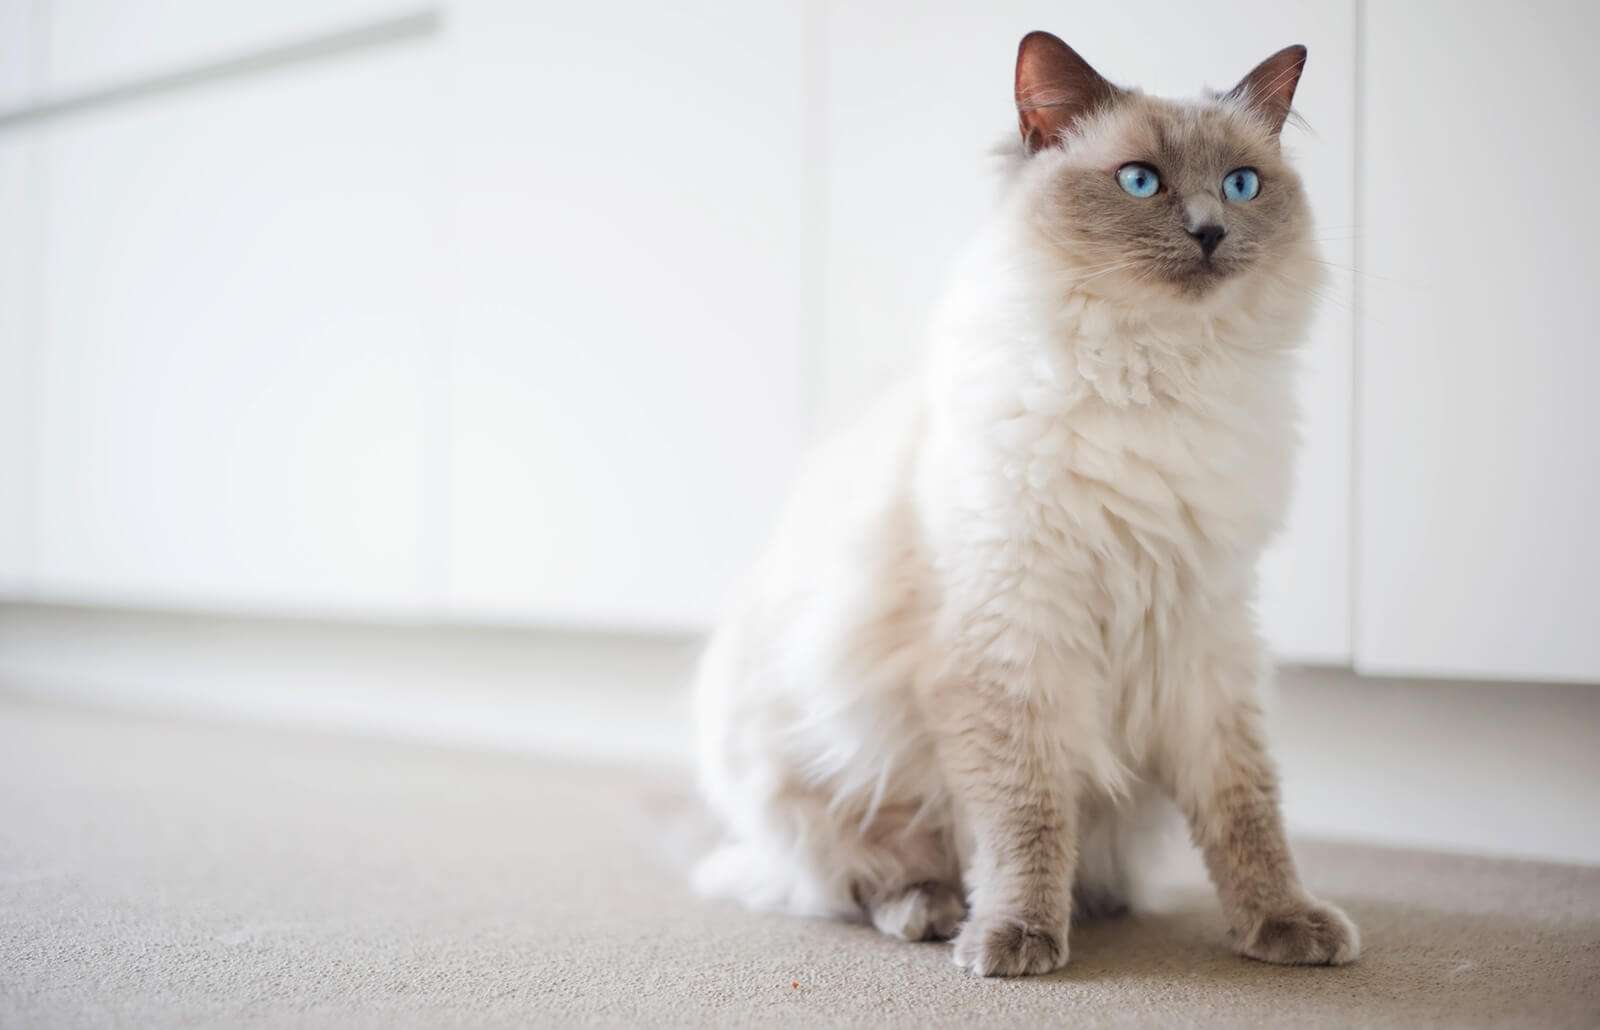 Where Are Ragdoll Cats From